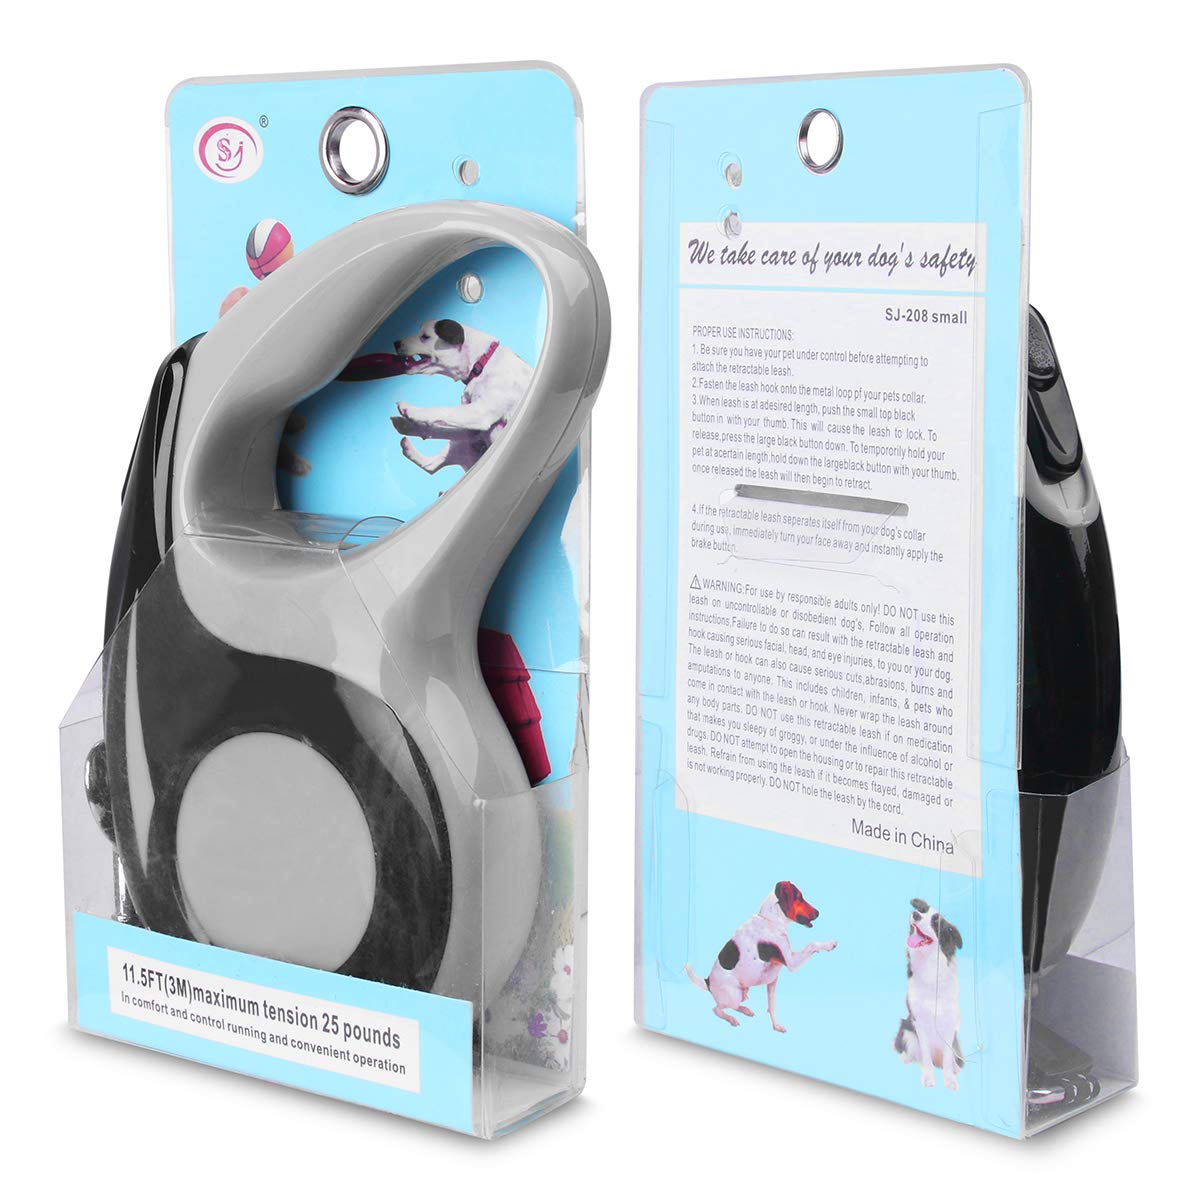 Retractable Dog Leash with Tangle-Free Heavy Duty One Button Break & Lock Tape